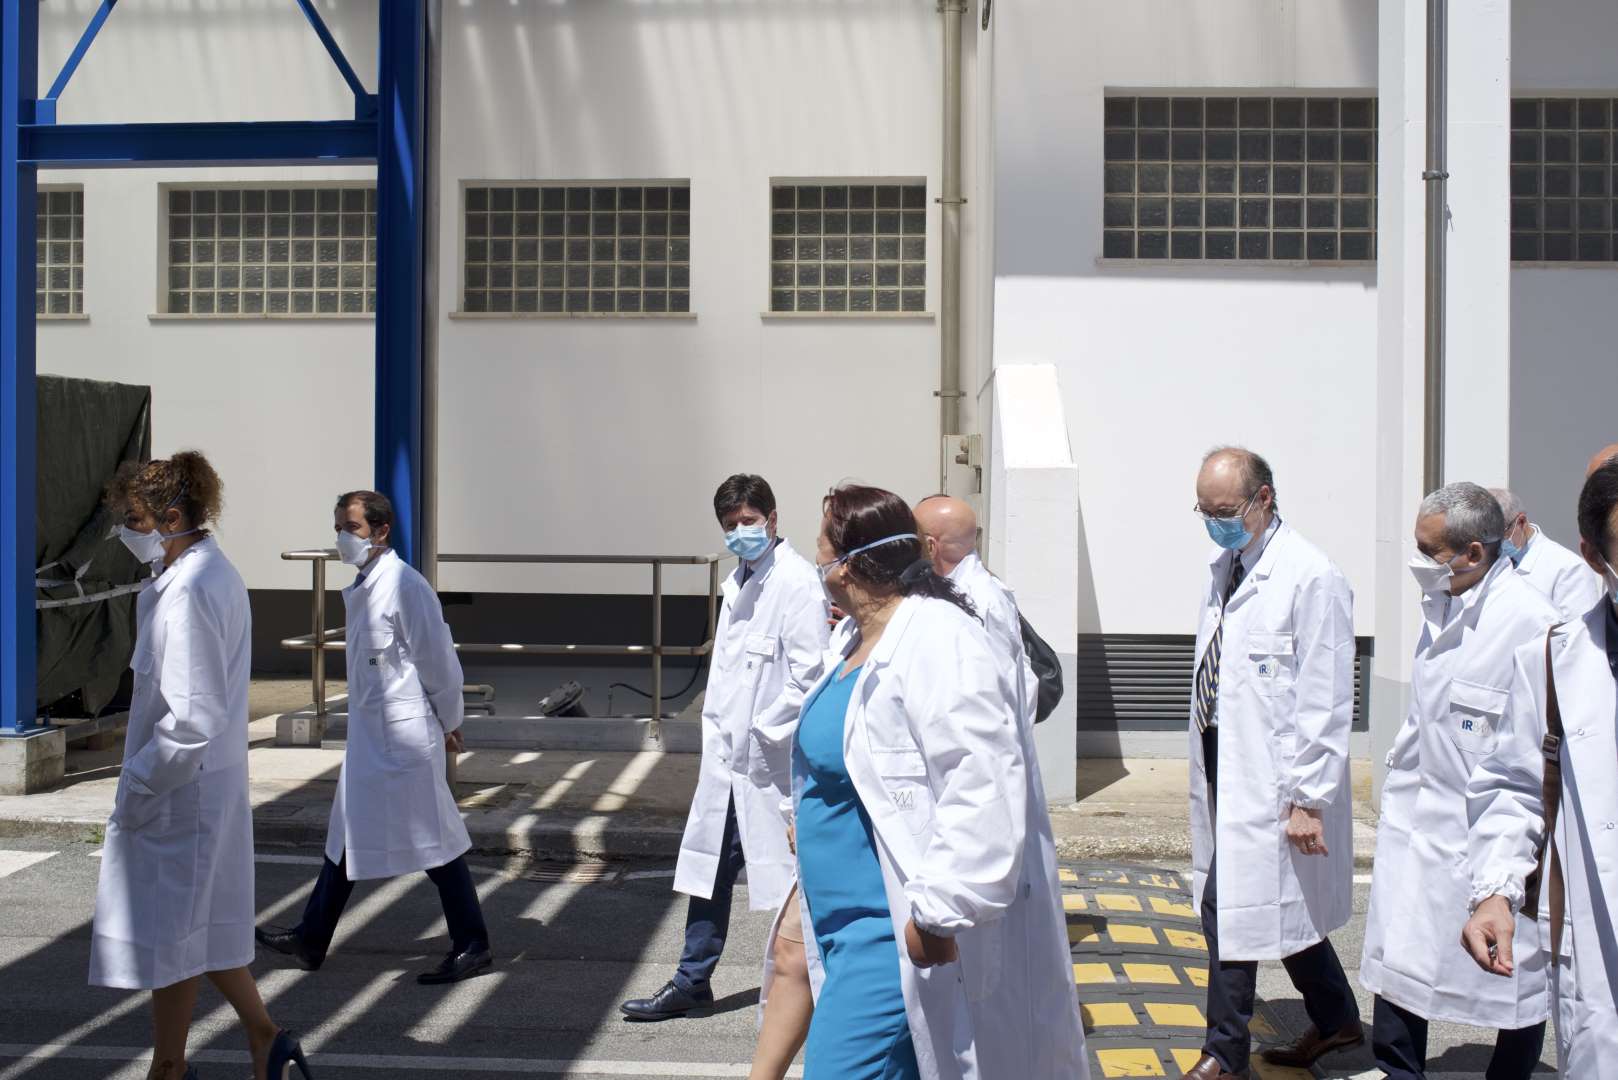 Roberto Speranza, Italian health minister, center facing camera, is taken on a tour of the labs at IRBM in Pomezia, Italy, on June 18, 2020. (Geraldine Hope Ghelli)